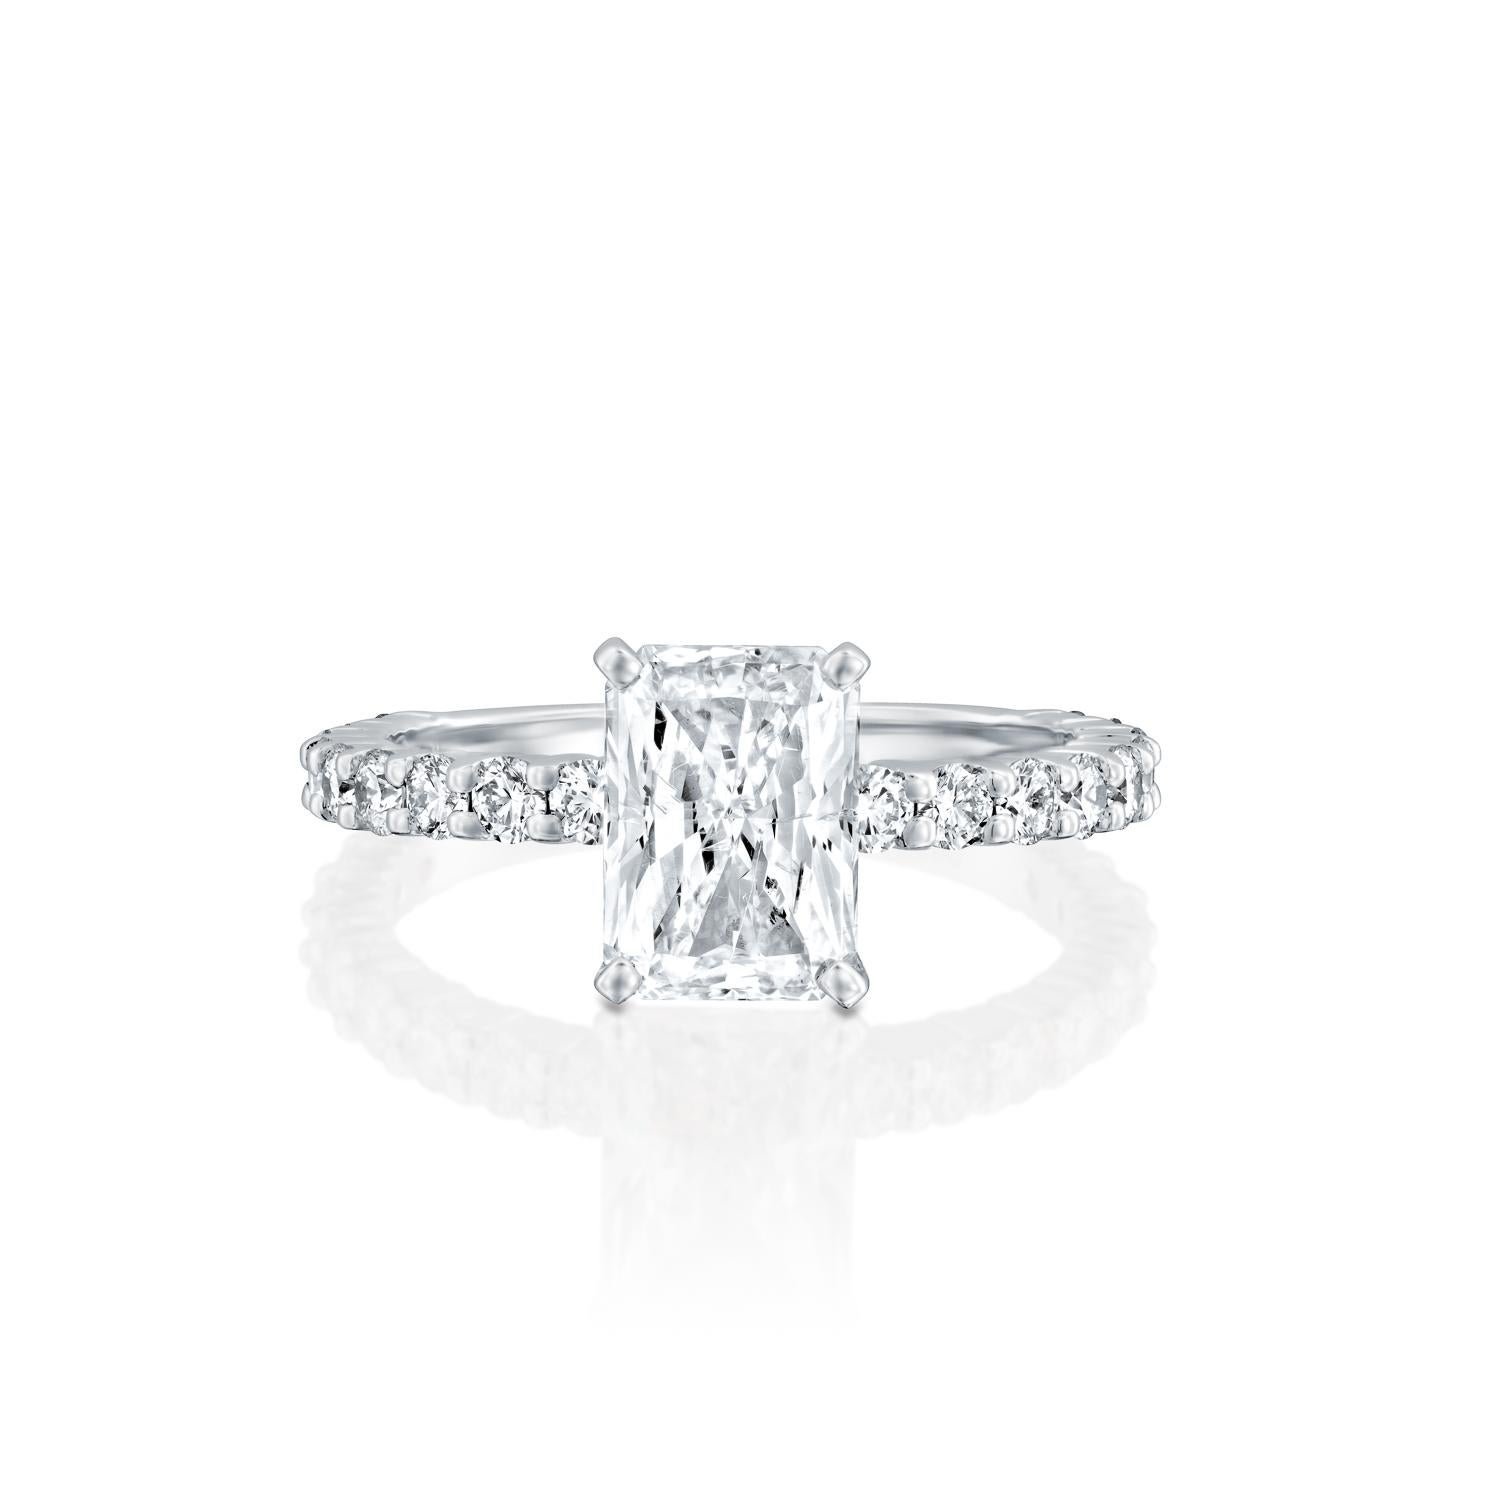 This impressive ring features a solitaire GIA certified diamond. Center stone is 100% eye clean natural, radiant shaped 1 carat diamond of F-G color and VS2-SI1 clarity and it is surrounded by smaller natural round diamonds of 0.90 total carat